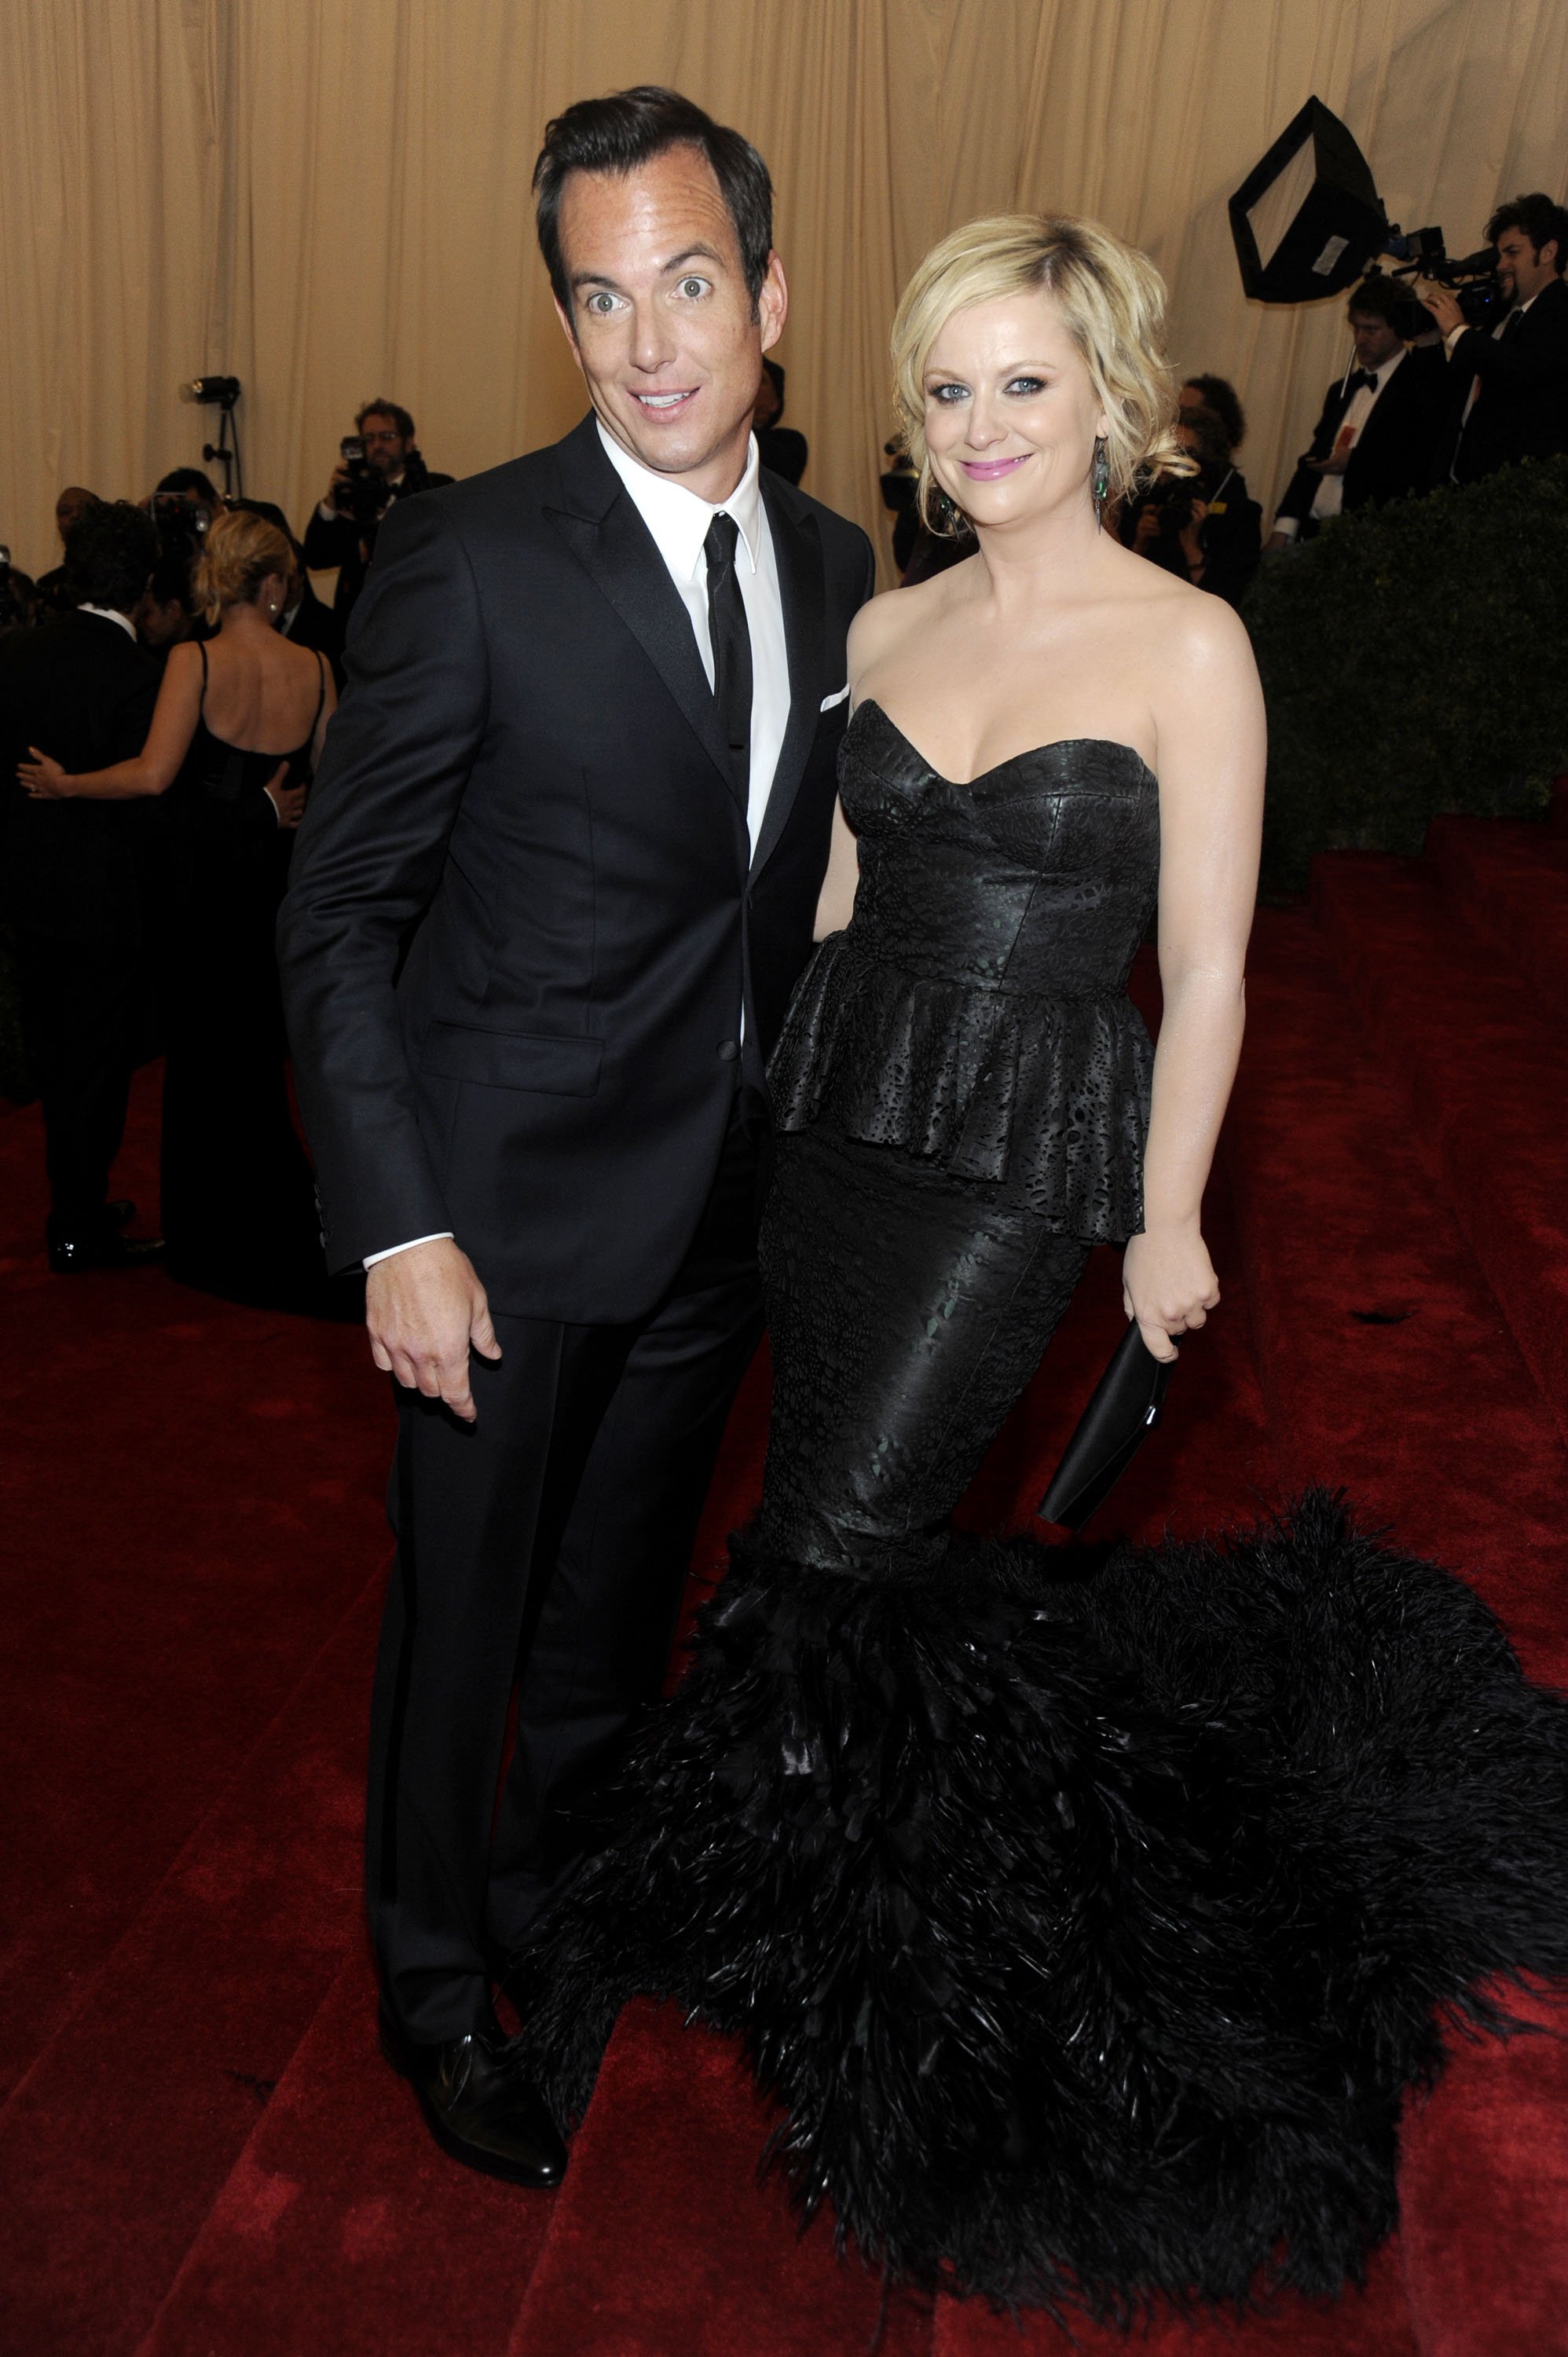 Will Arnett and Amy Poehler attend the "Schiaparelli And Prada: Impossible Conversations" Costume Institute Gala at the Metropolitan Museum of Art on May 7, 2012, in New York City. | Source: Getty Images